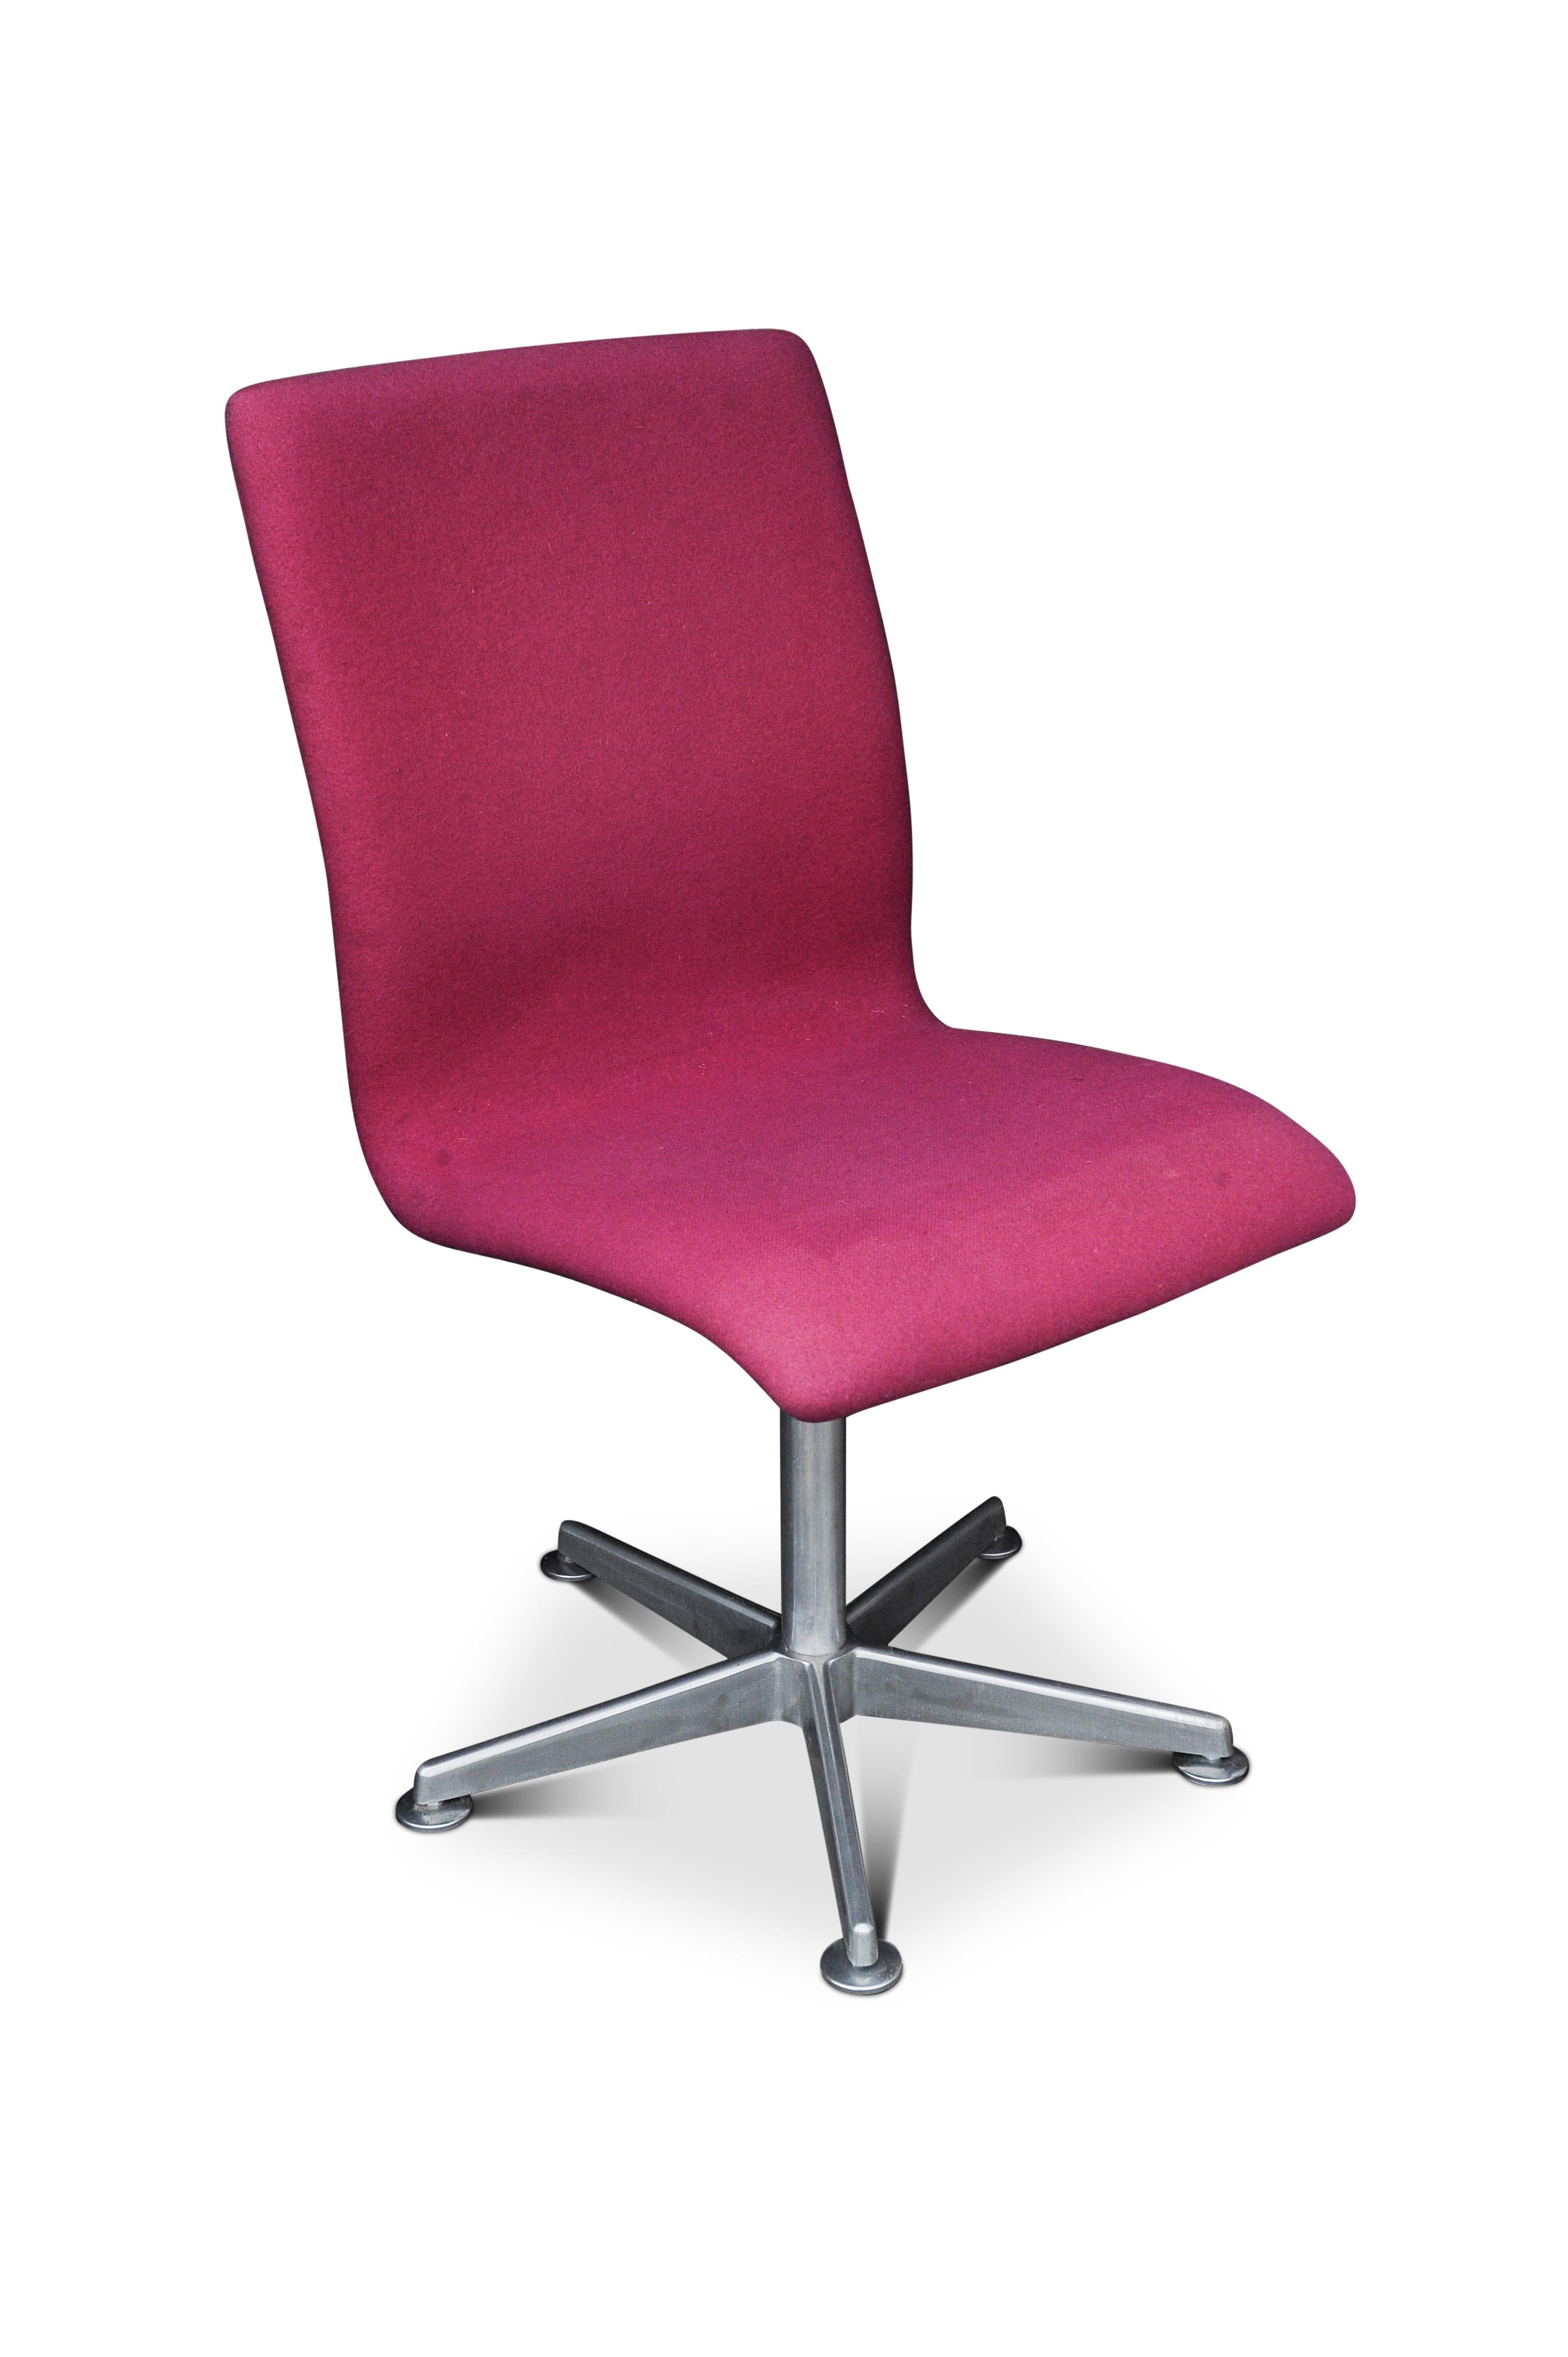 Arne Jacobsen Oxford E1107 Pink Upholstered Swivel Chair for Fritz Hansen In Good Condition For Sale In High Wycombe, GB